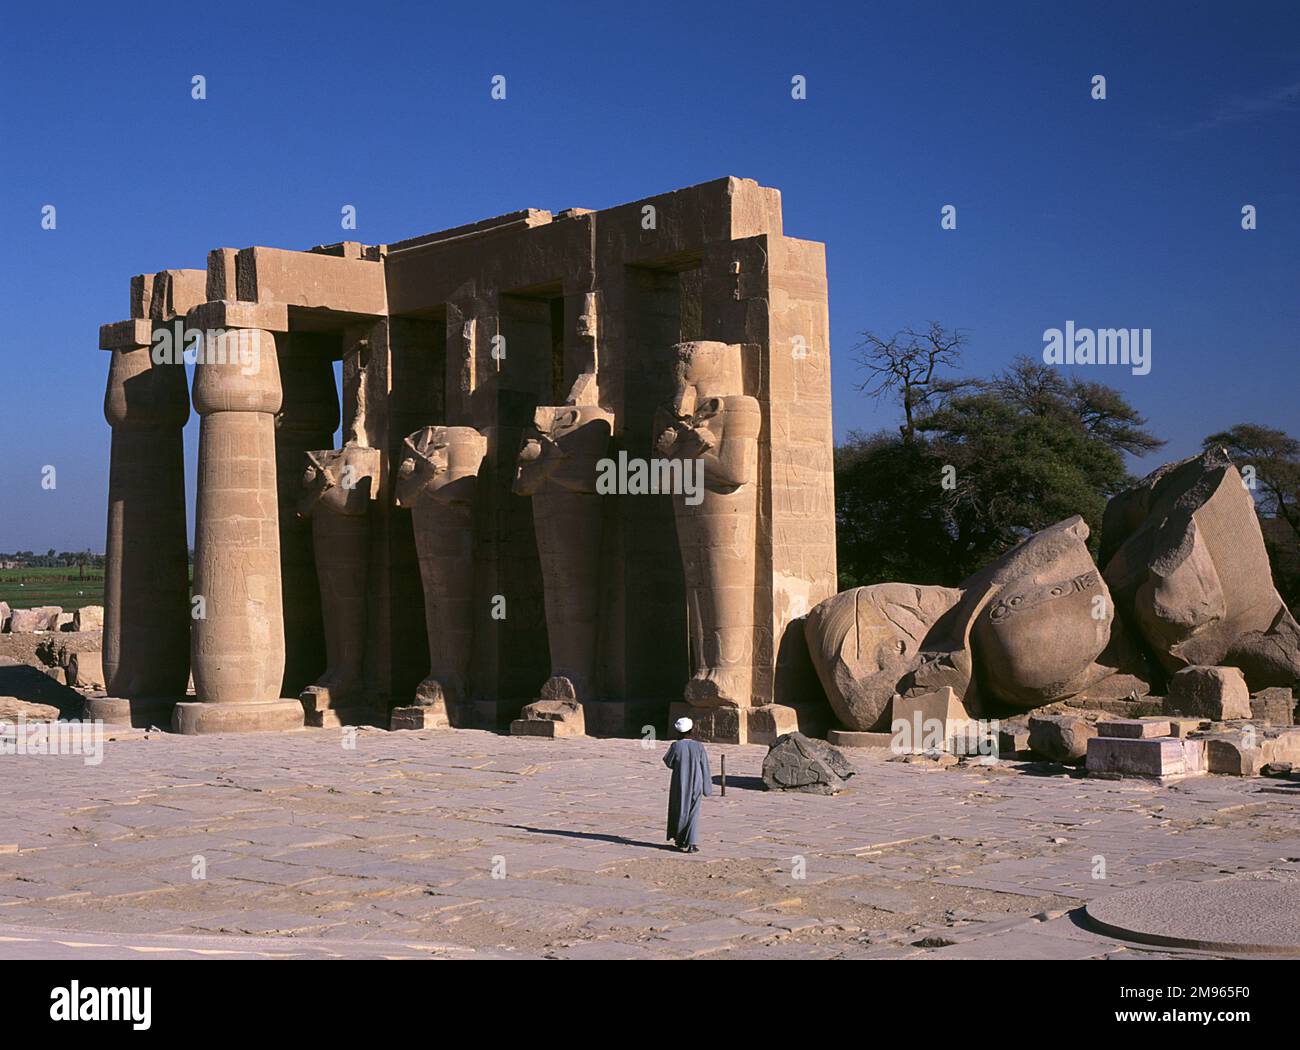 The 'RAMESSEUM', the mausoleum of Egyptian Pharoah RAMESES II. Here we see the 4 Osiris pillars and 2 Papyrus pillars, with the fallen statue of Rameses, Thebes (Luxor), Egypt Stock Photo